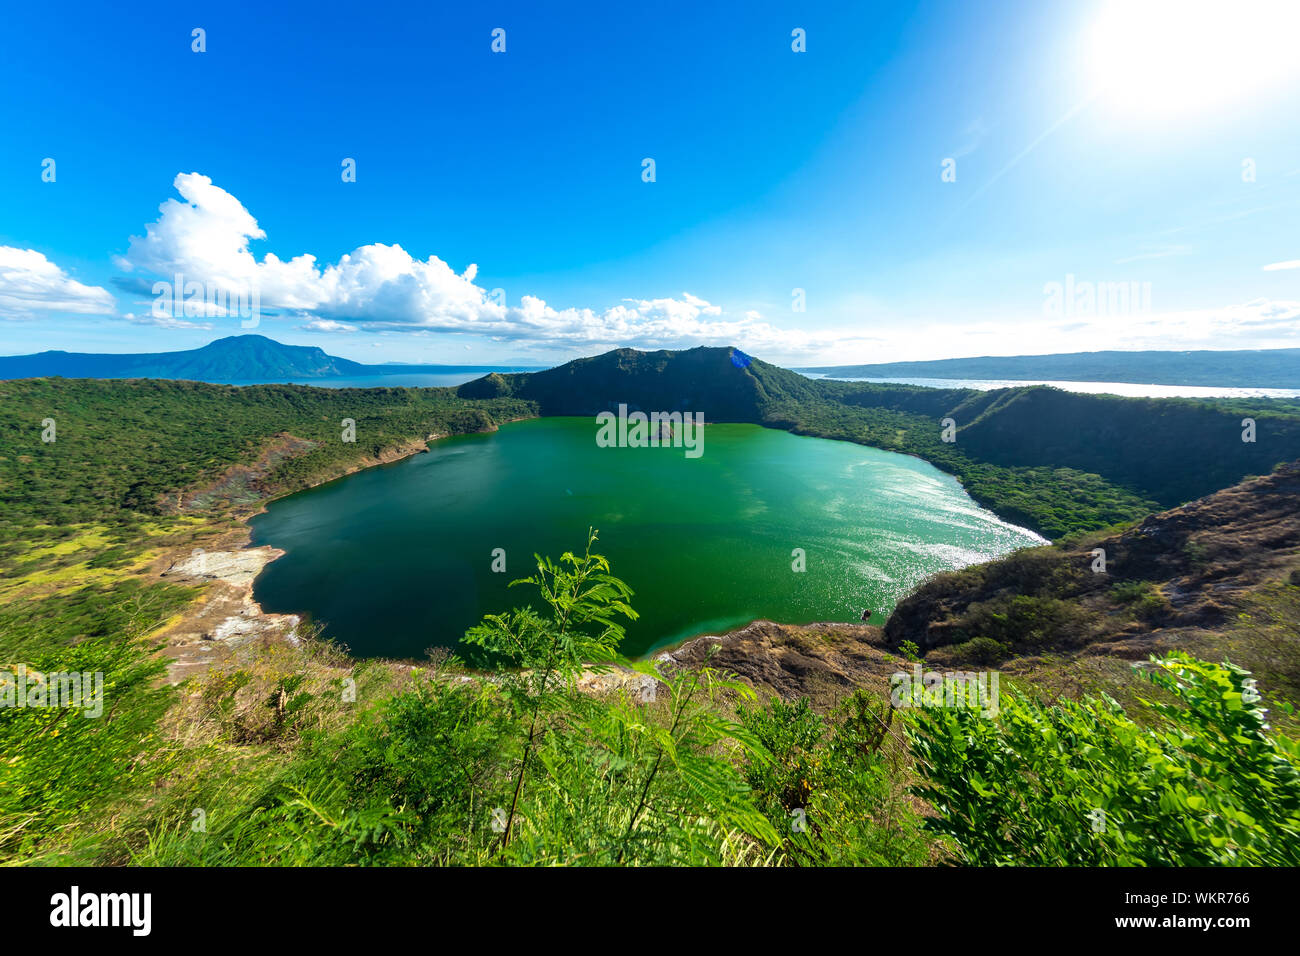 View of cones of Taal Volcano and the wind ruffled emerald green water in the Lake Taal on a sunny day in Tagaytay, Philippines. Stock Photo